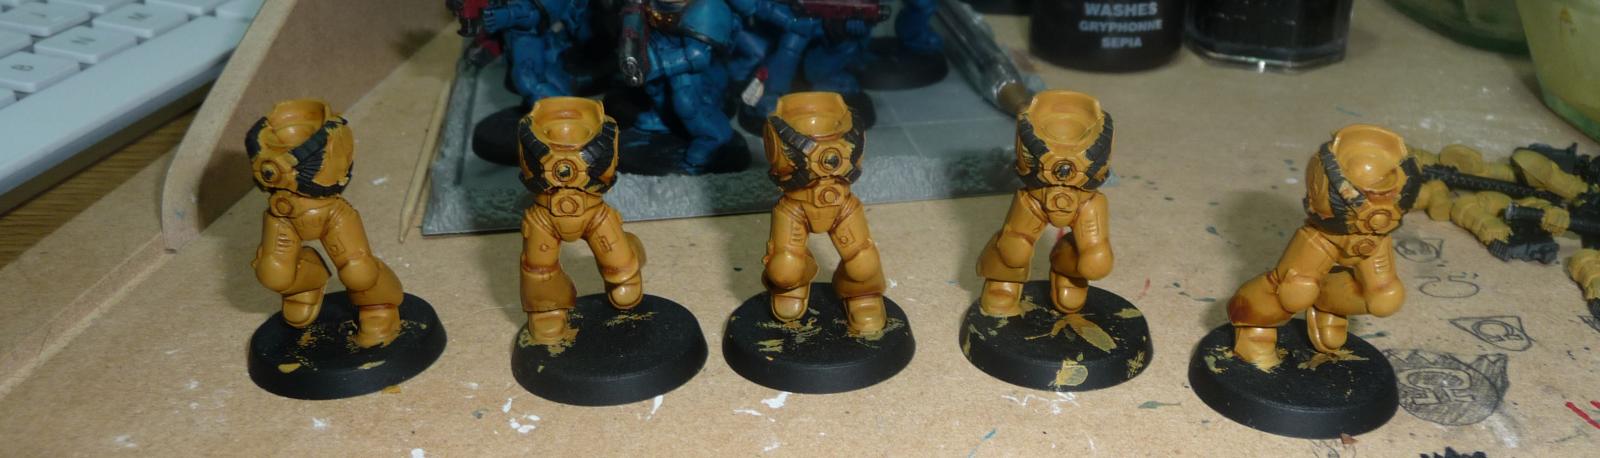 Imperial Fists 5th Company - WIP